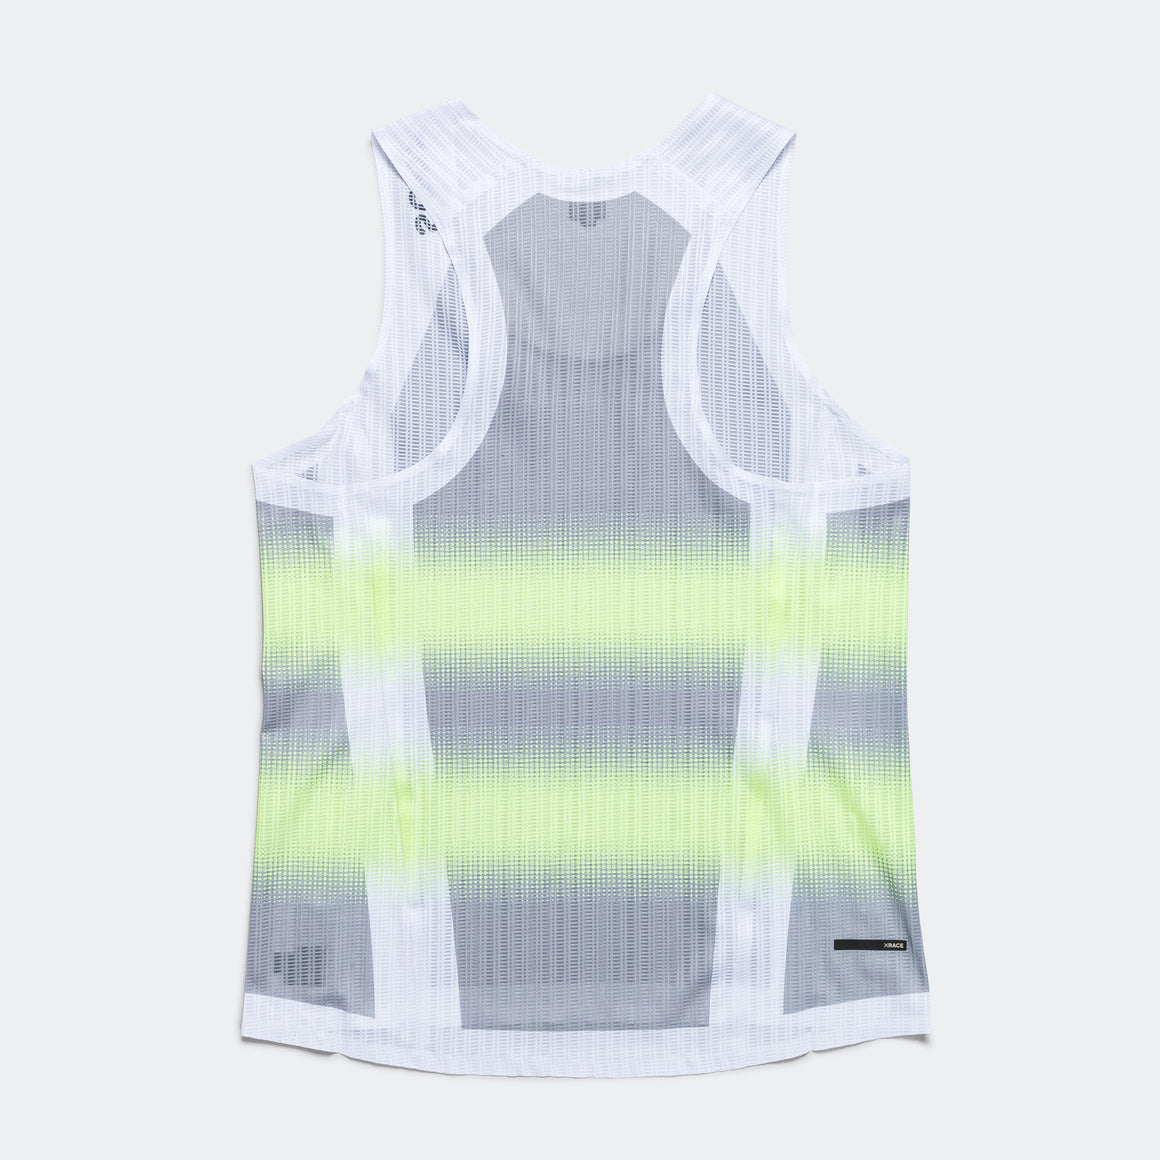 Soar - Womens Race Vest - Grey/Yellow - Up There Athletics